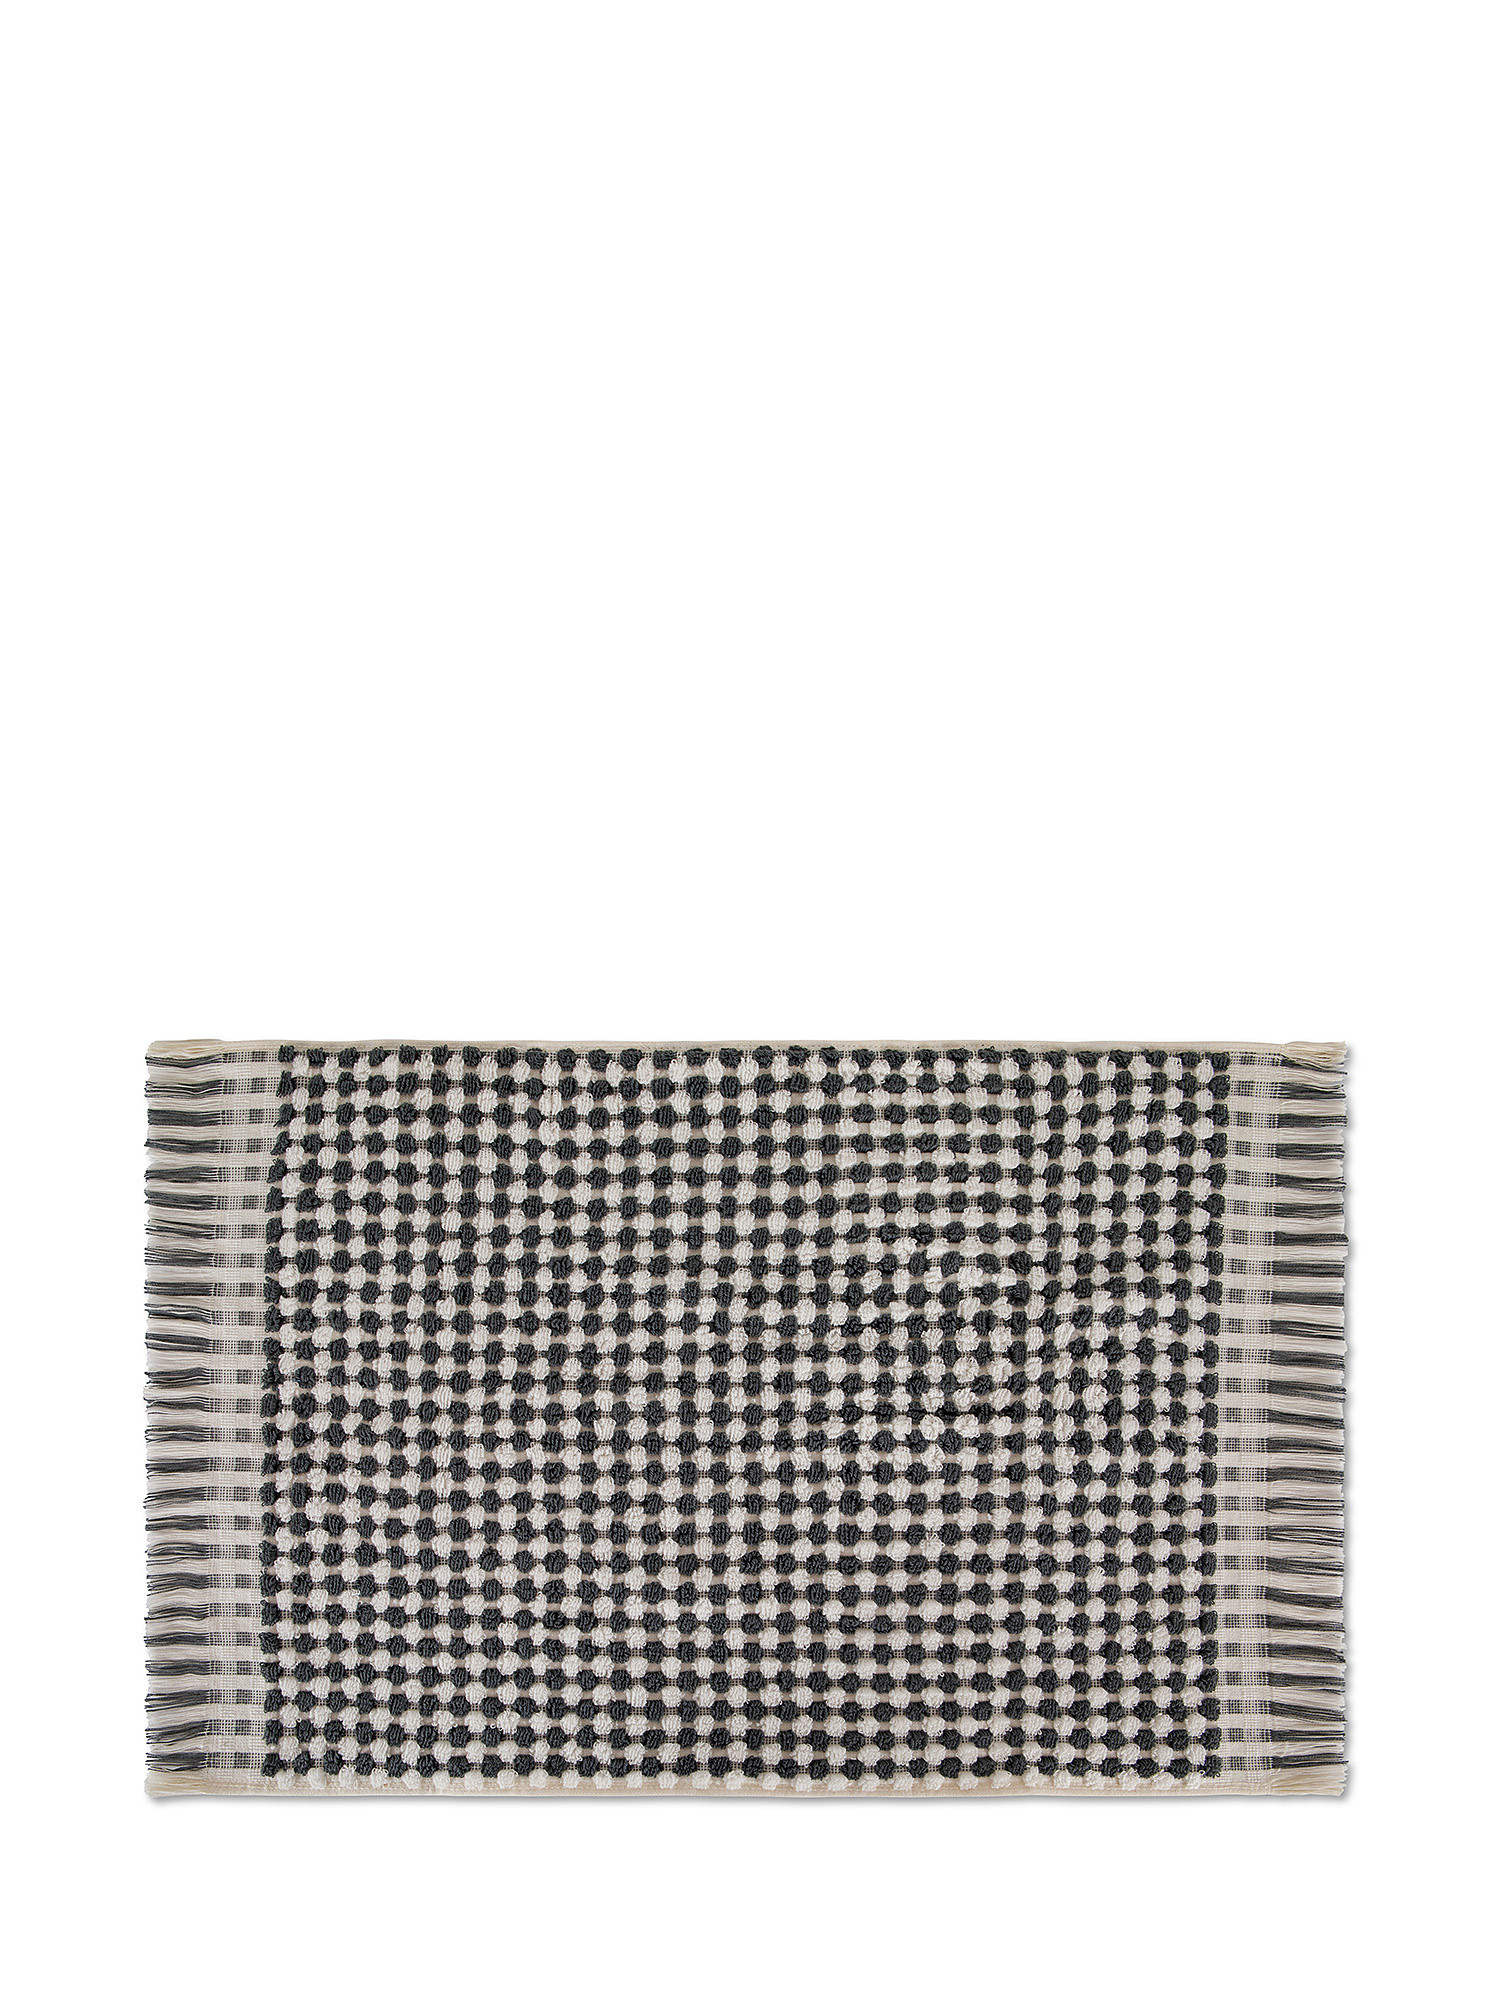 Thermae check weave towel in 100% cotton terry, White Black, large image number 2